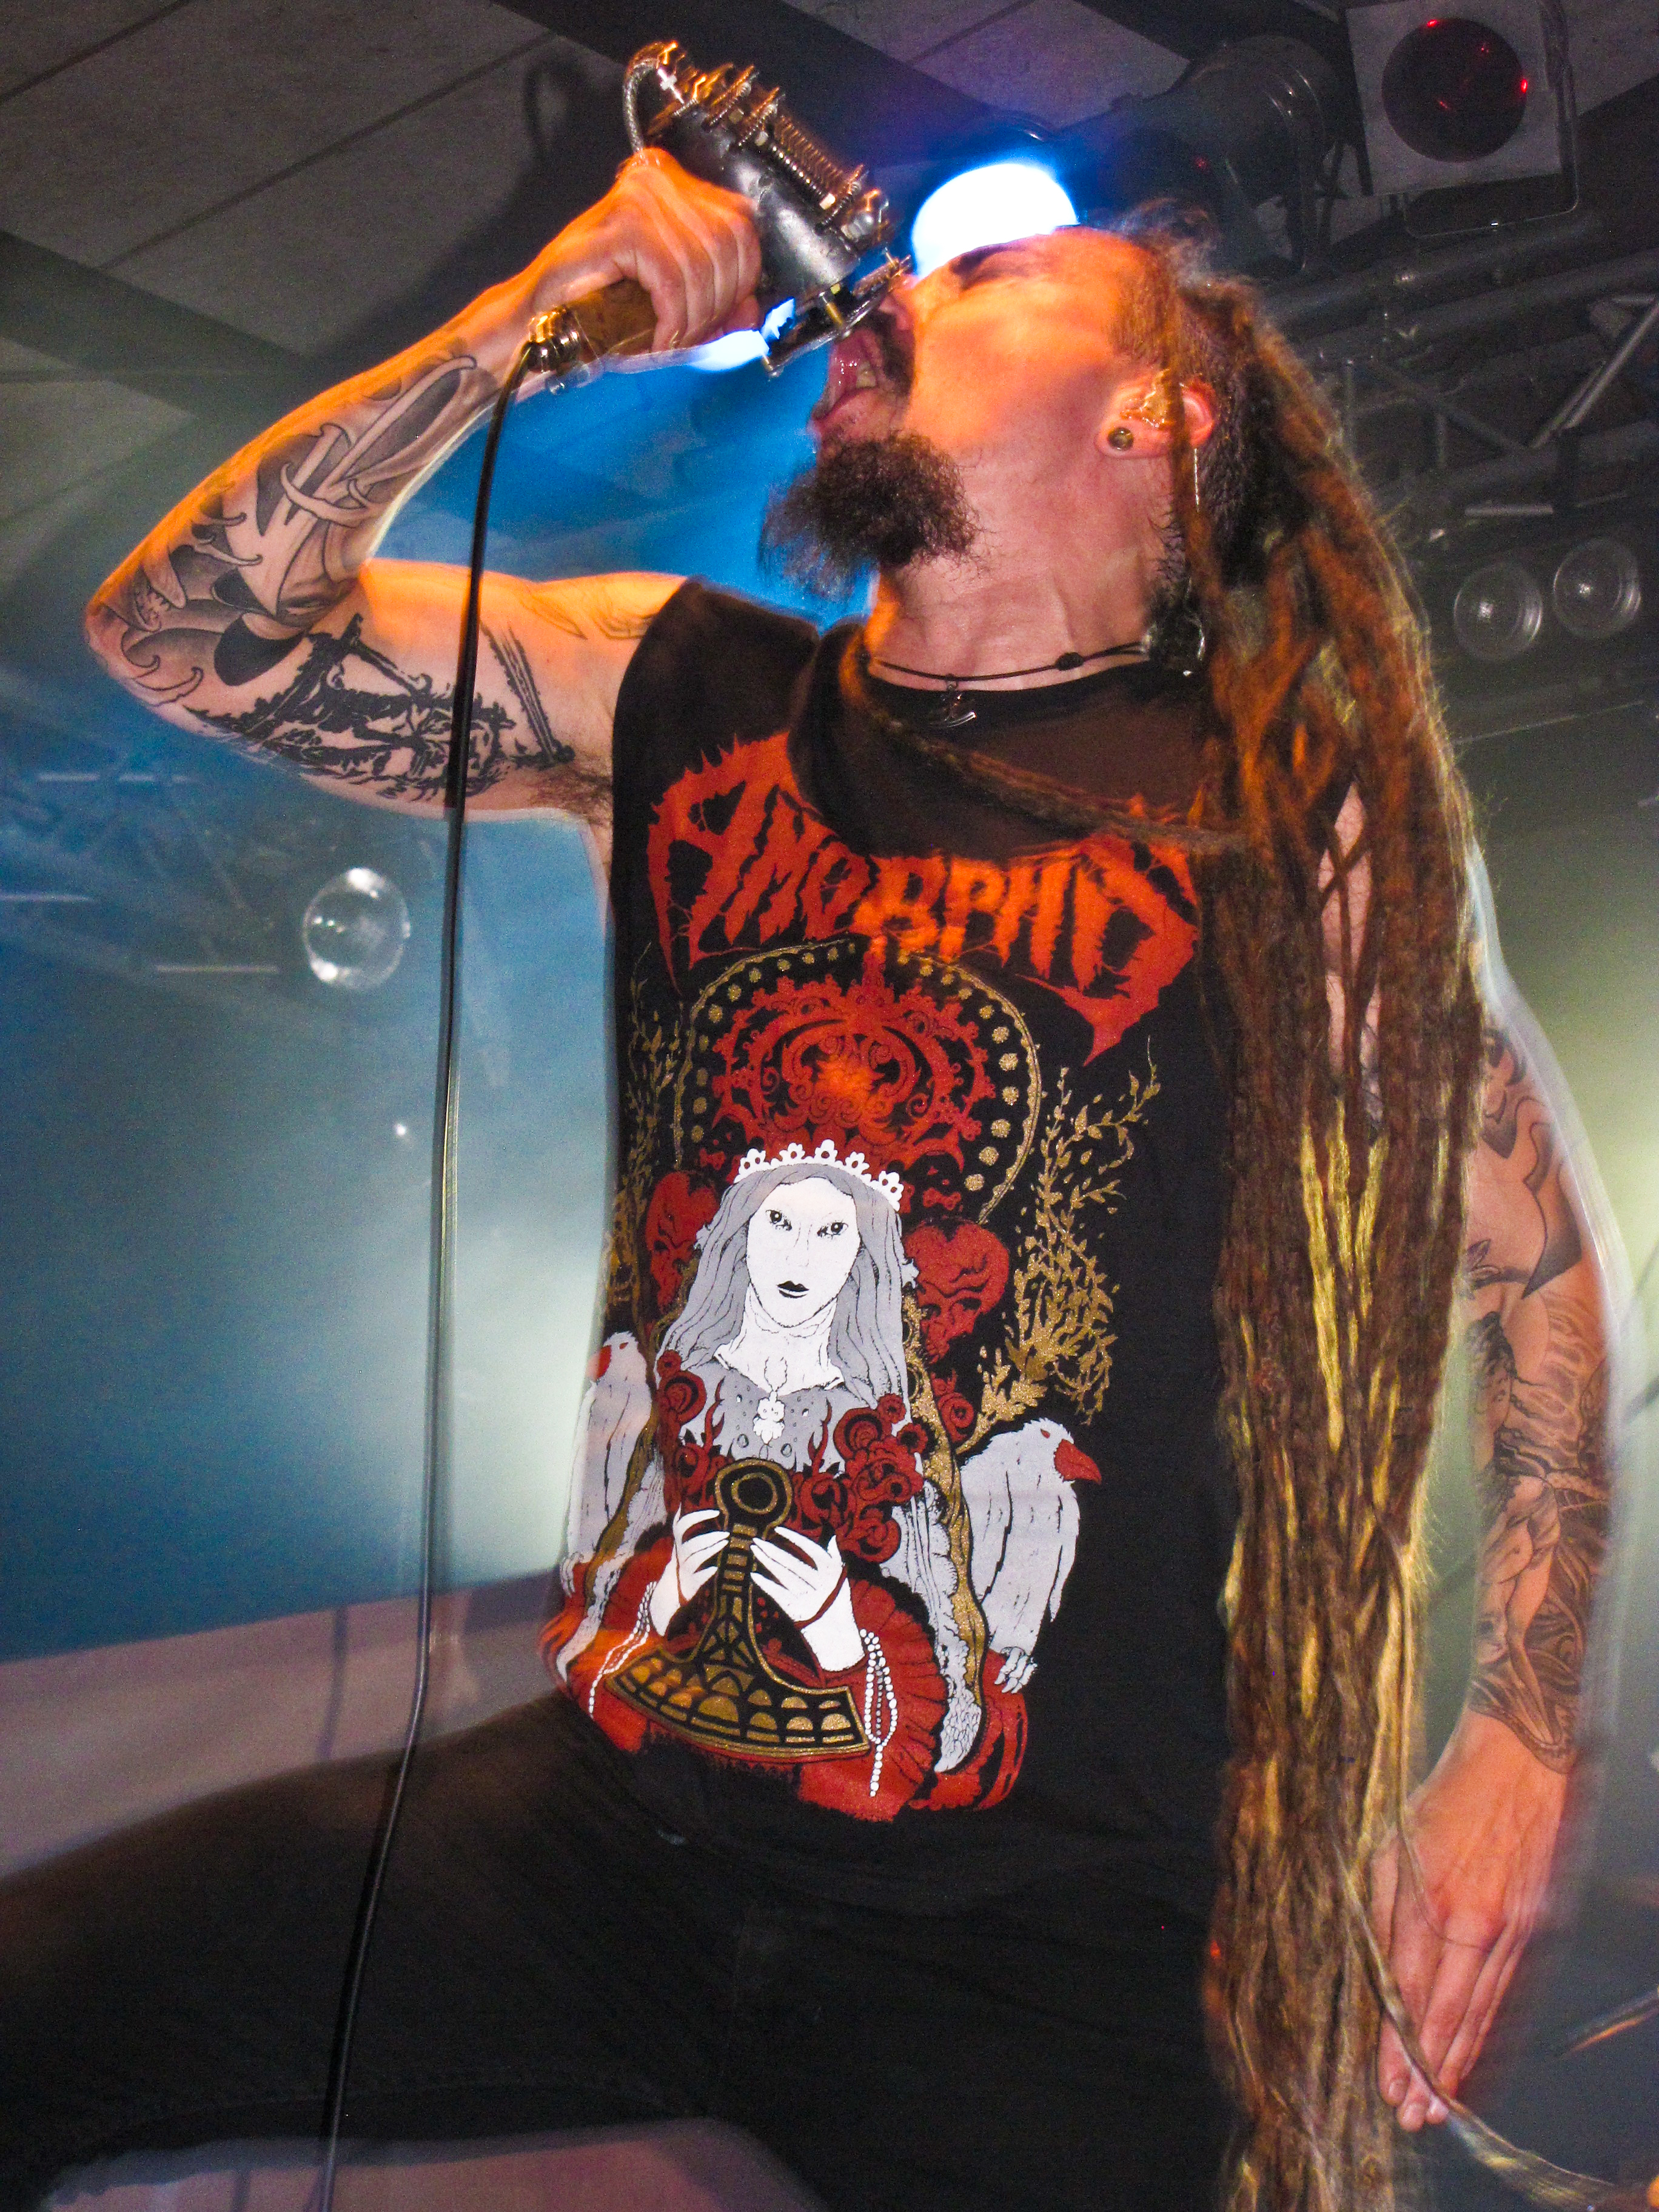 File:Amorphis live in 2010, 3.jpg - Wikimedia Commons